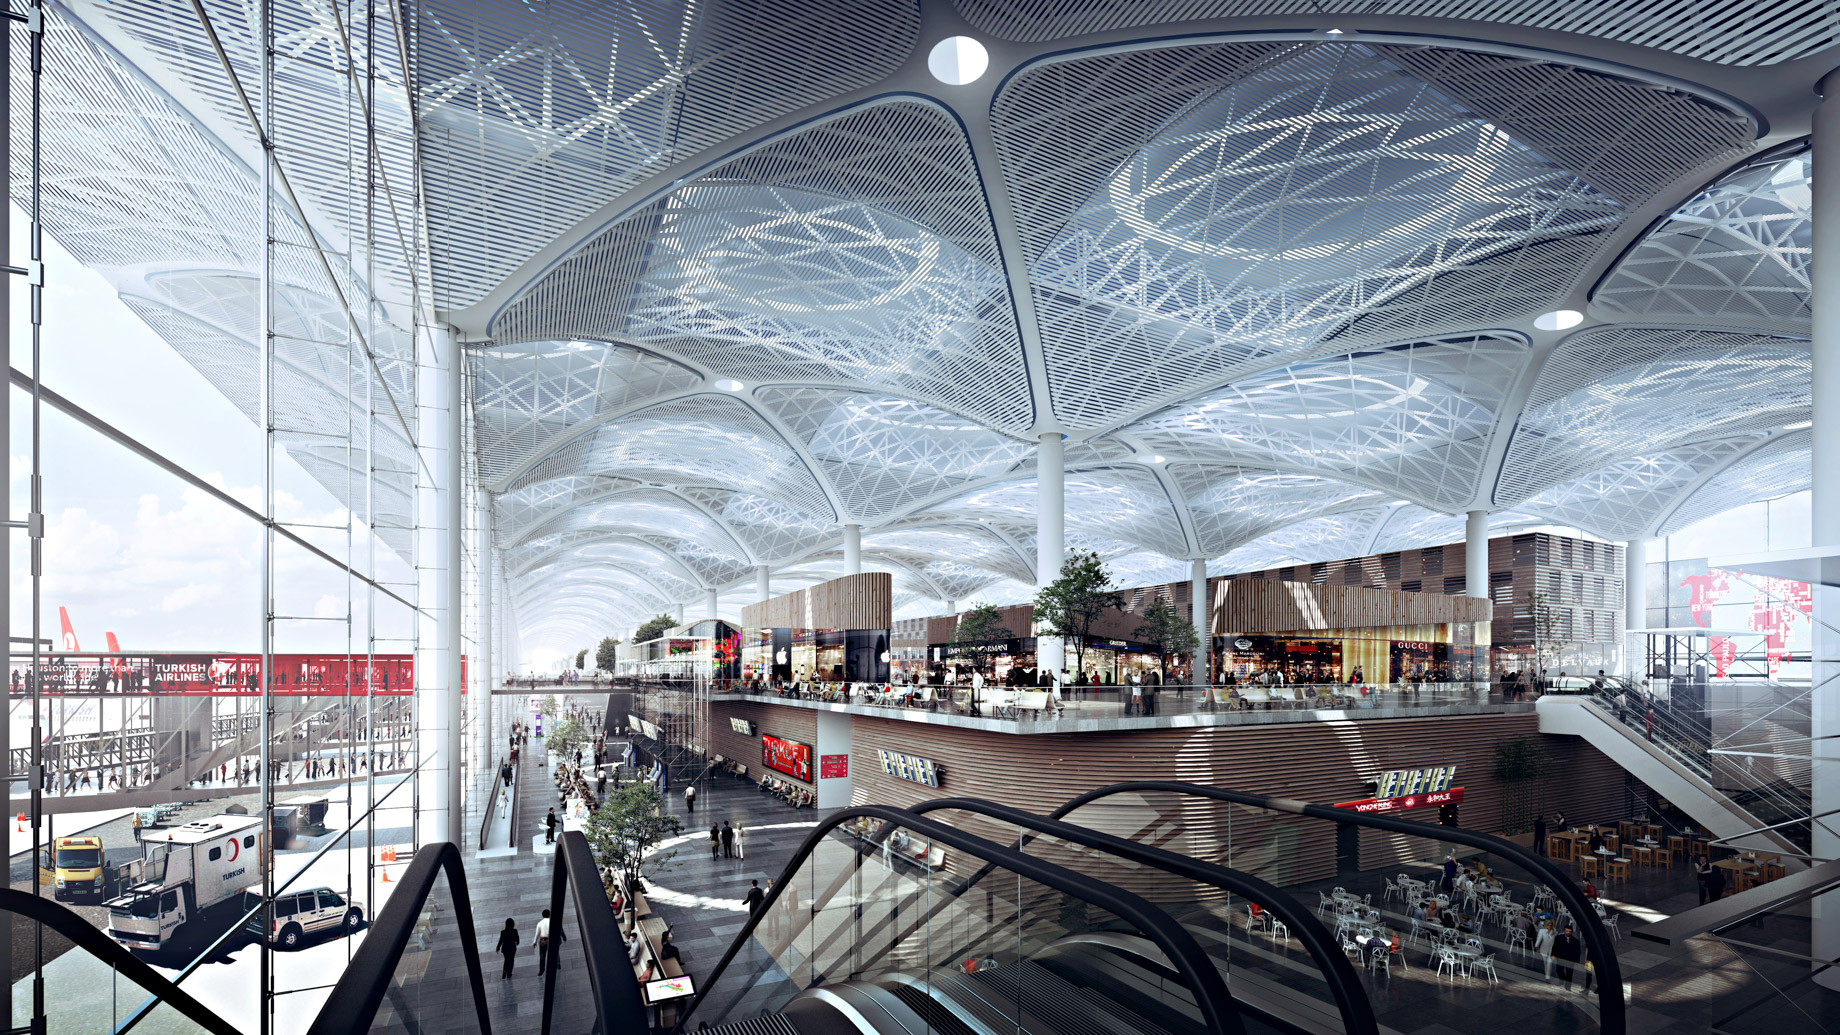 Airside – New International Airport in Istanbul, Turkey will be a Modern Architectural Masterpiece